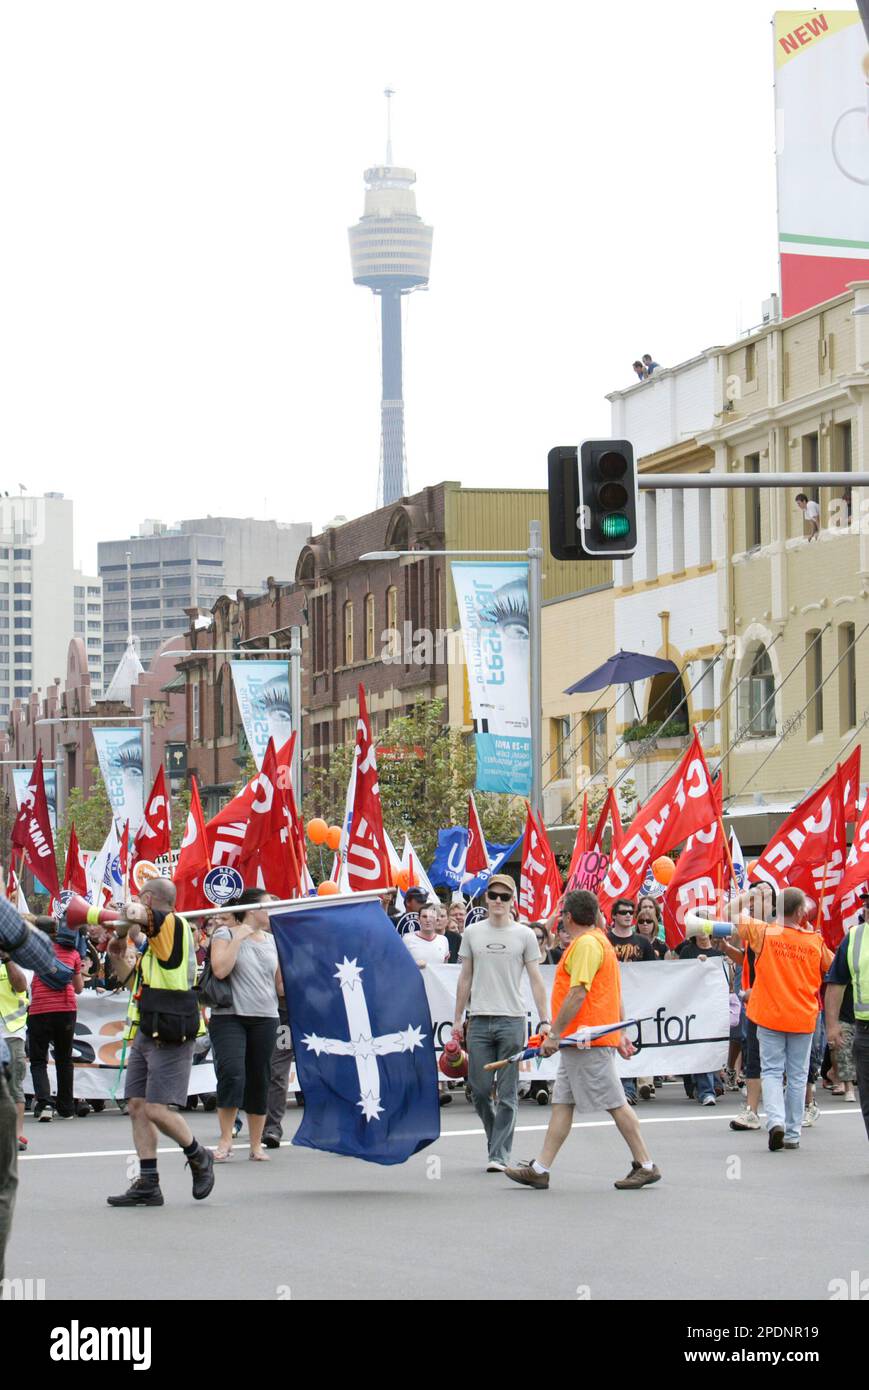 A crowd of 40,000 marches through Sydney in protest at the Liberal (conservative) government’s Industrial Relations policies and changes to workplace laws. The march preceded a concert at the Sydney Cricket Ground that featured a line-up of popular Australian bands. Sydney, Australia. 22.04.07. Stock Photo